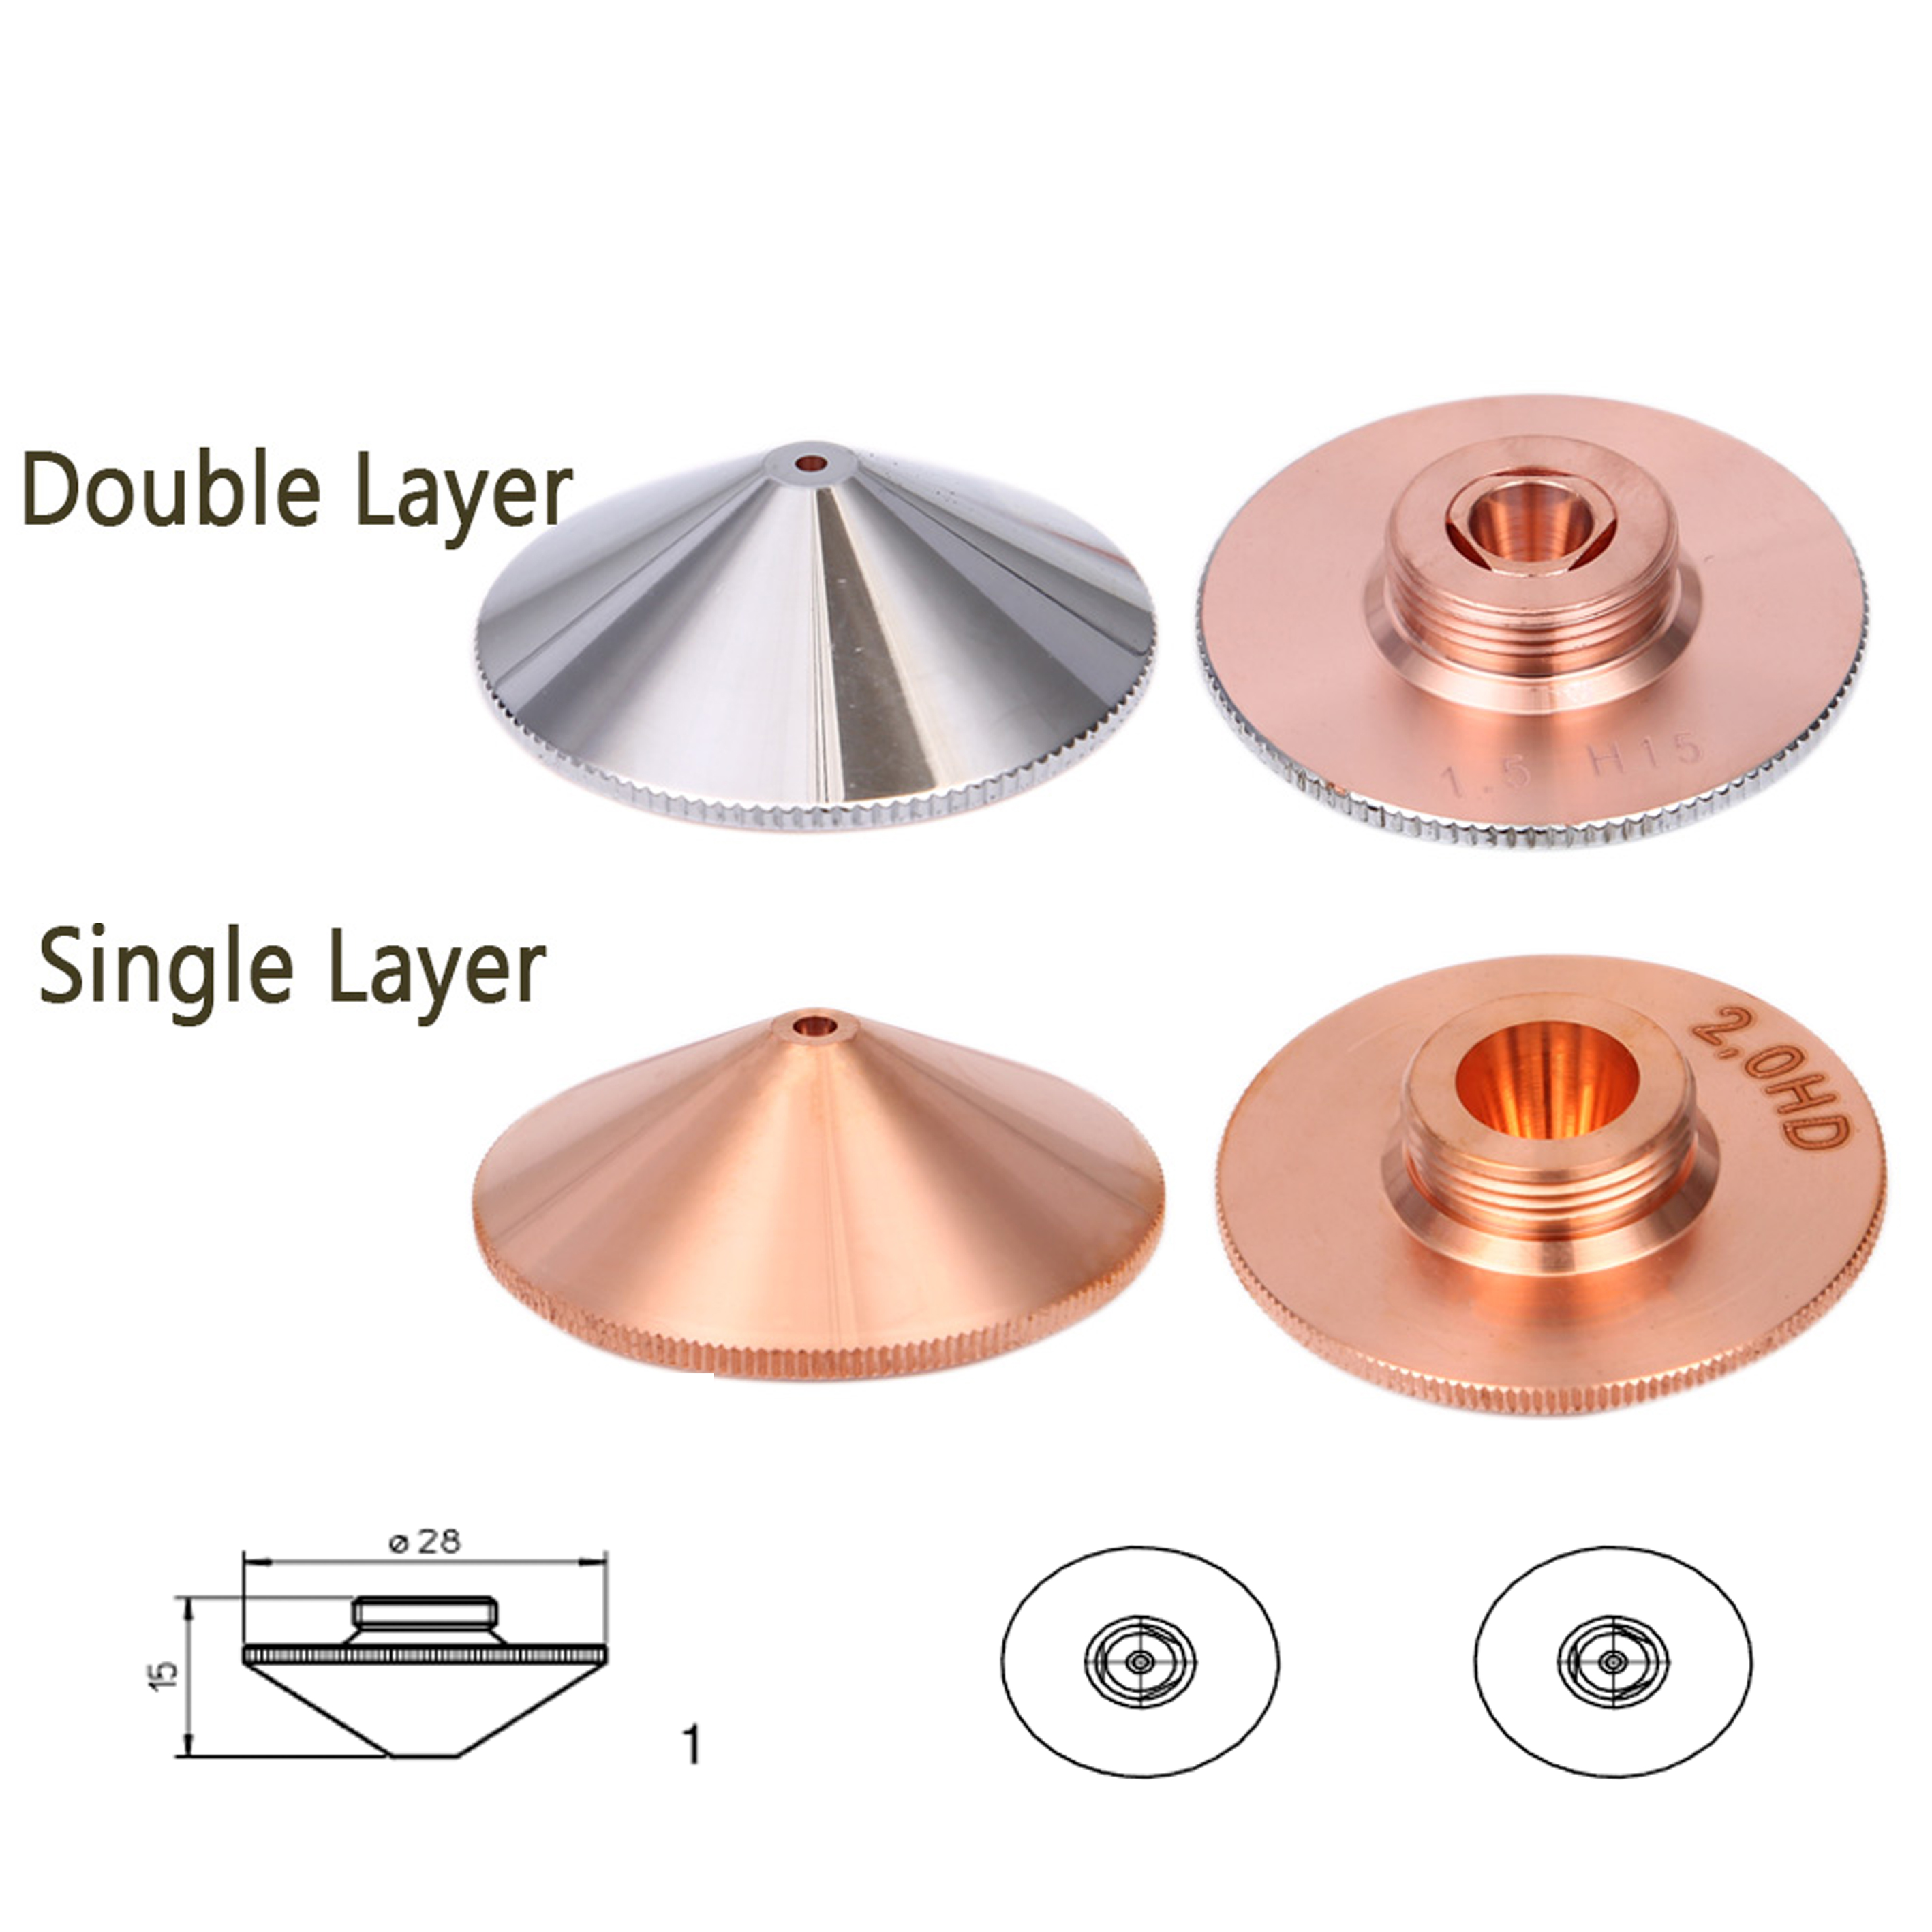 Double Layer, Caliber:1.2 JHCHMX Fiber Laser Cutting Nozzles Dia.28mm H15 M11 Single/Double Layer 0.8-3.0mm For Precitec WSX Han's Fiber Laser Cutting Machines 